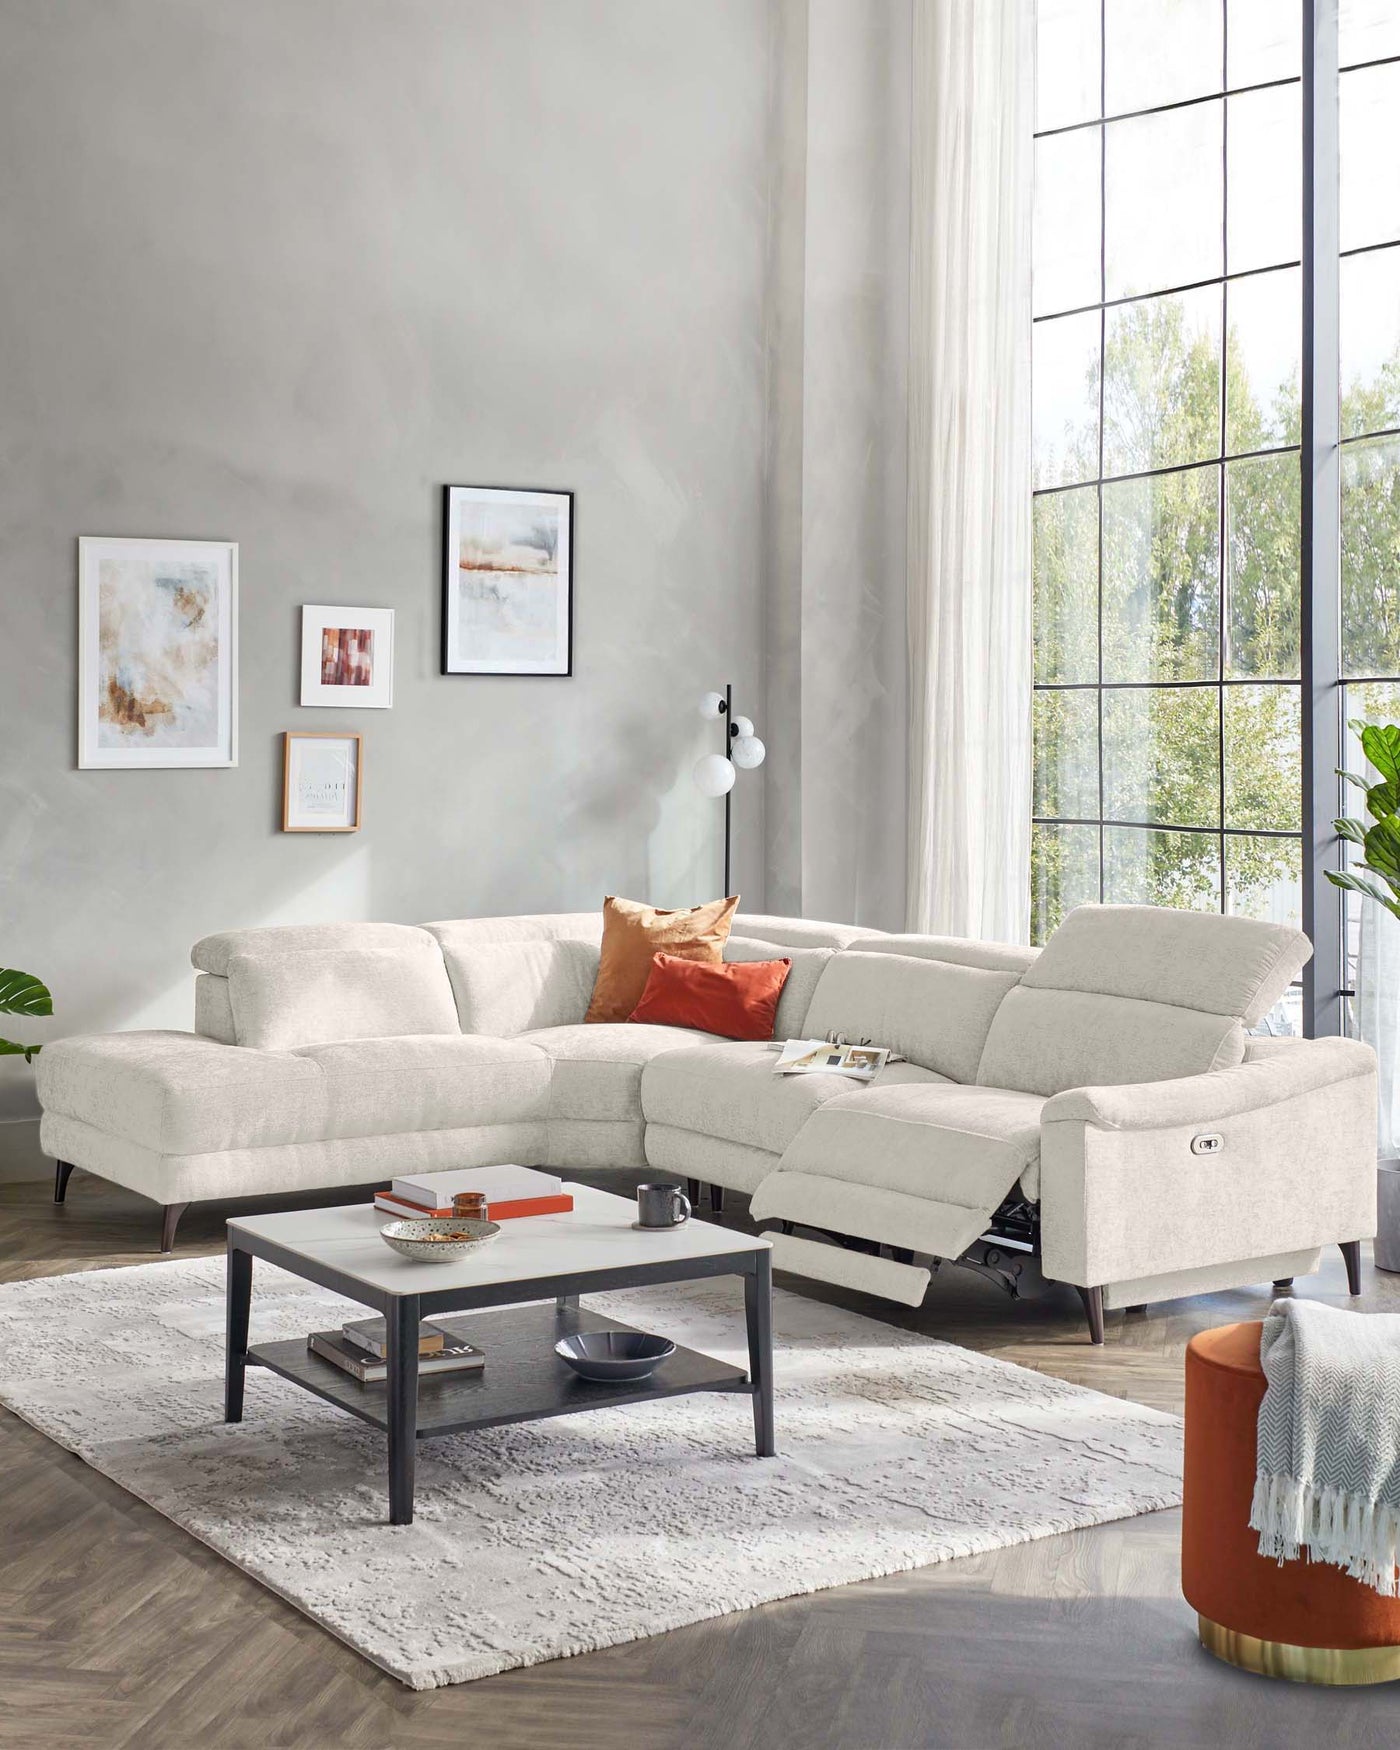 Modern light grey sectional sofa with chaise and reclining function, situated on a white plush area rug. A rectangular black metal coffee table with a grey surface, featuring a lower shelf, is centred in front of the sofa. An orange cylindrical ottoman with a gold base is positioned to the side, adorned with an off-white fringe throw blanket.